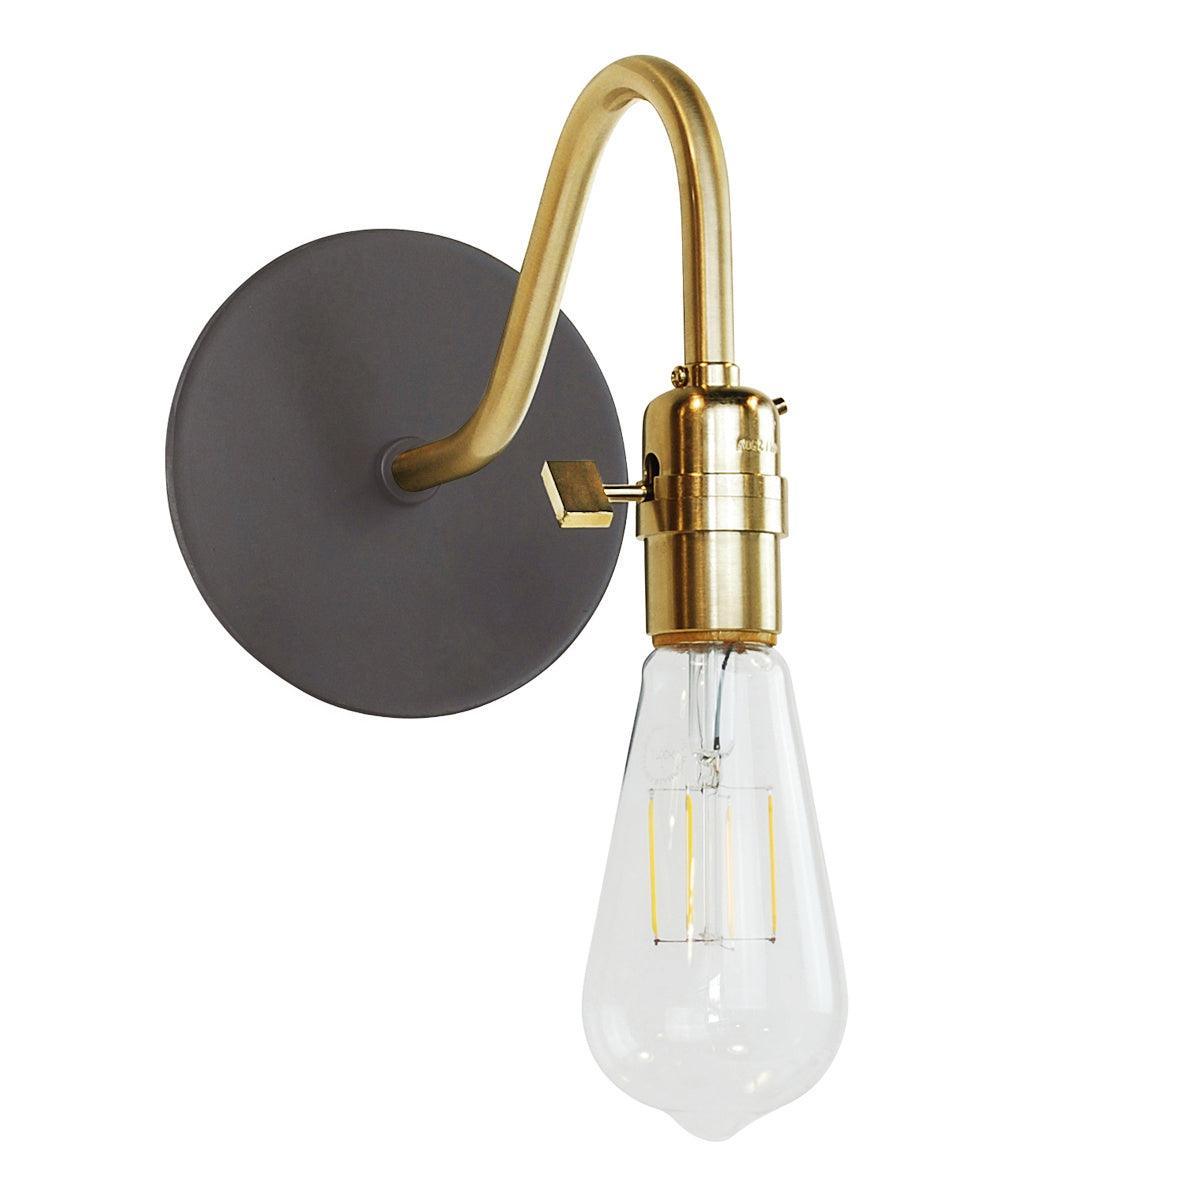 Montclair Light Works - Uno SCL400 Wall Sconce - SCL400-51-91 | Montreal Lighting & Hardware